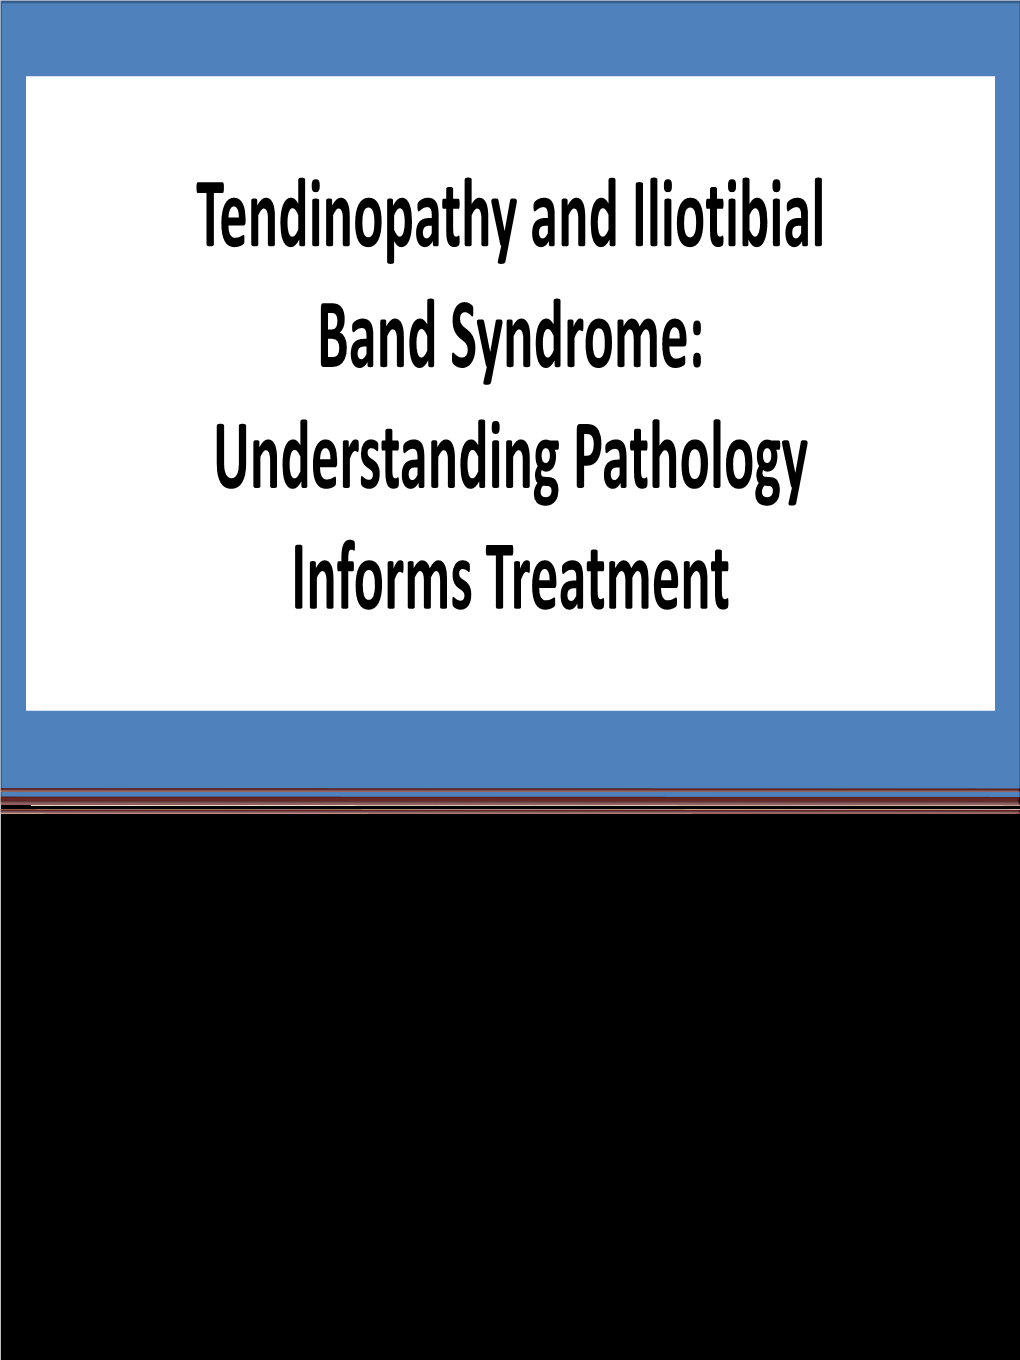 Tendinopathy and Iliotibial Band Syndrome: Understanding Pathology Informs Treatment